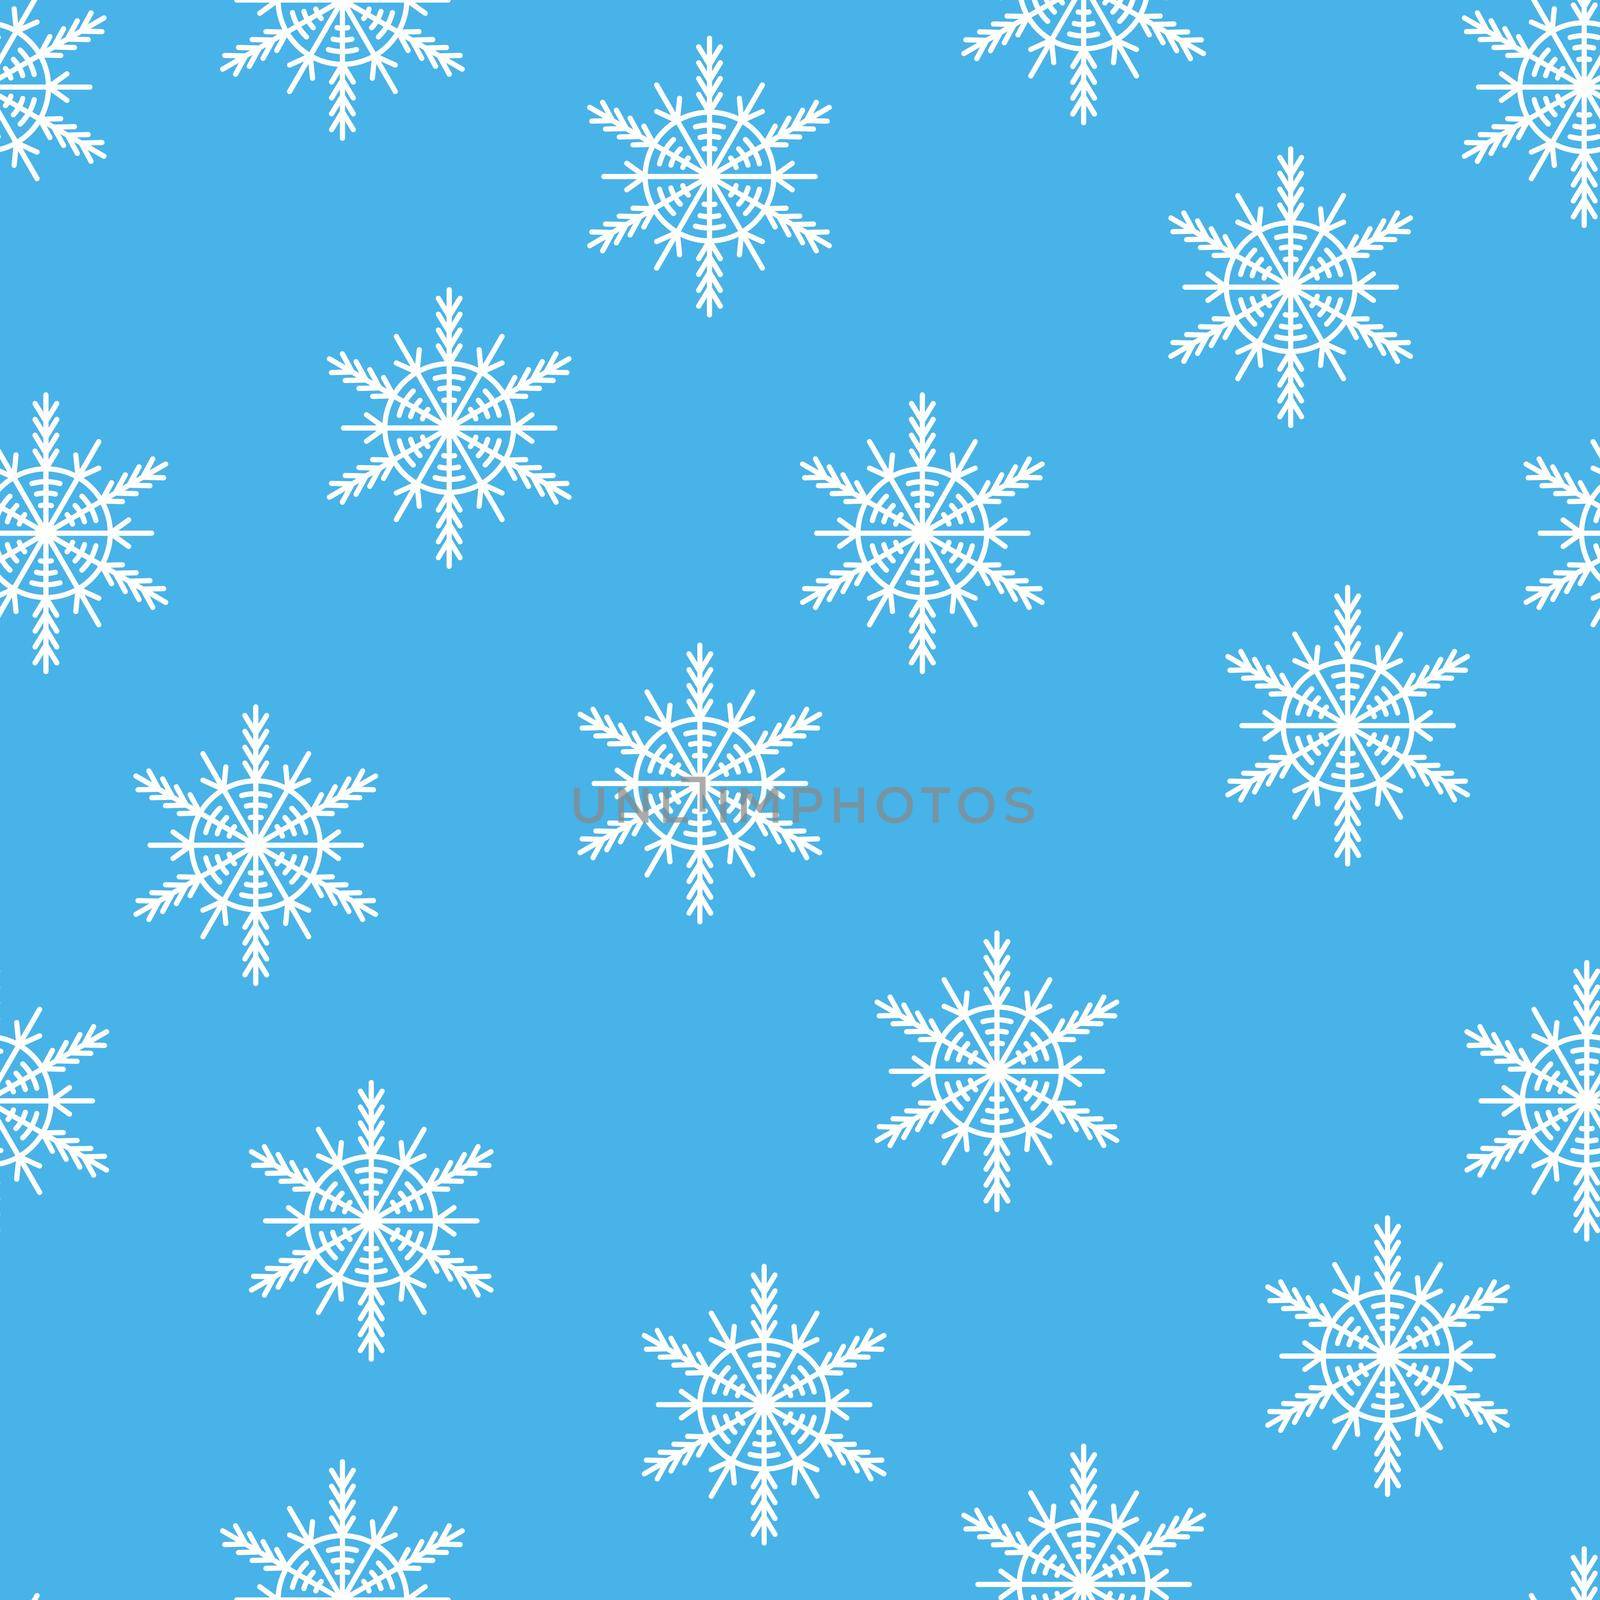 Winter seamless pattern with white snowflakes on blue background. Vector illustration for fabric, textile wallpaper, posters, gift wrapping paper. Christmas vector illustration